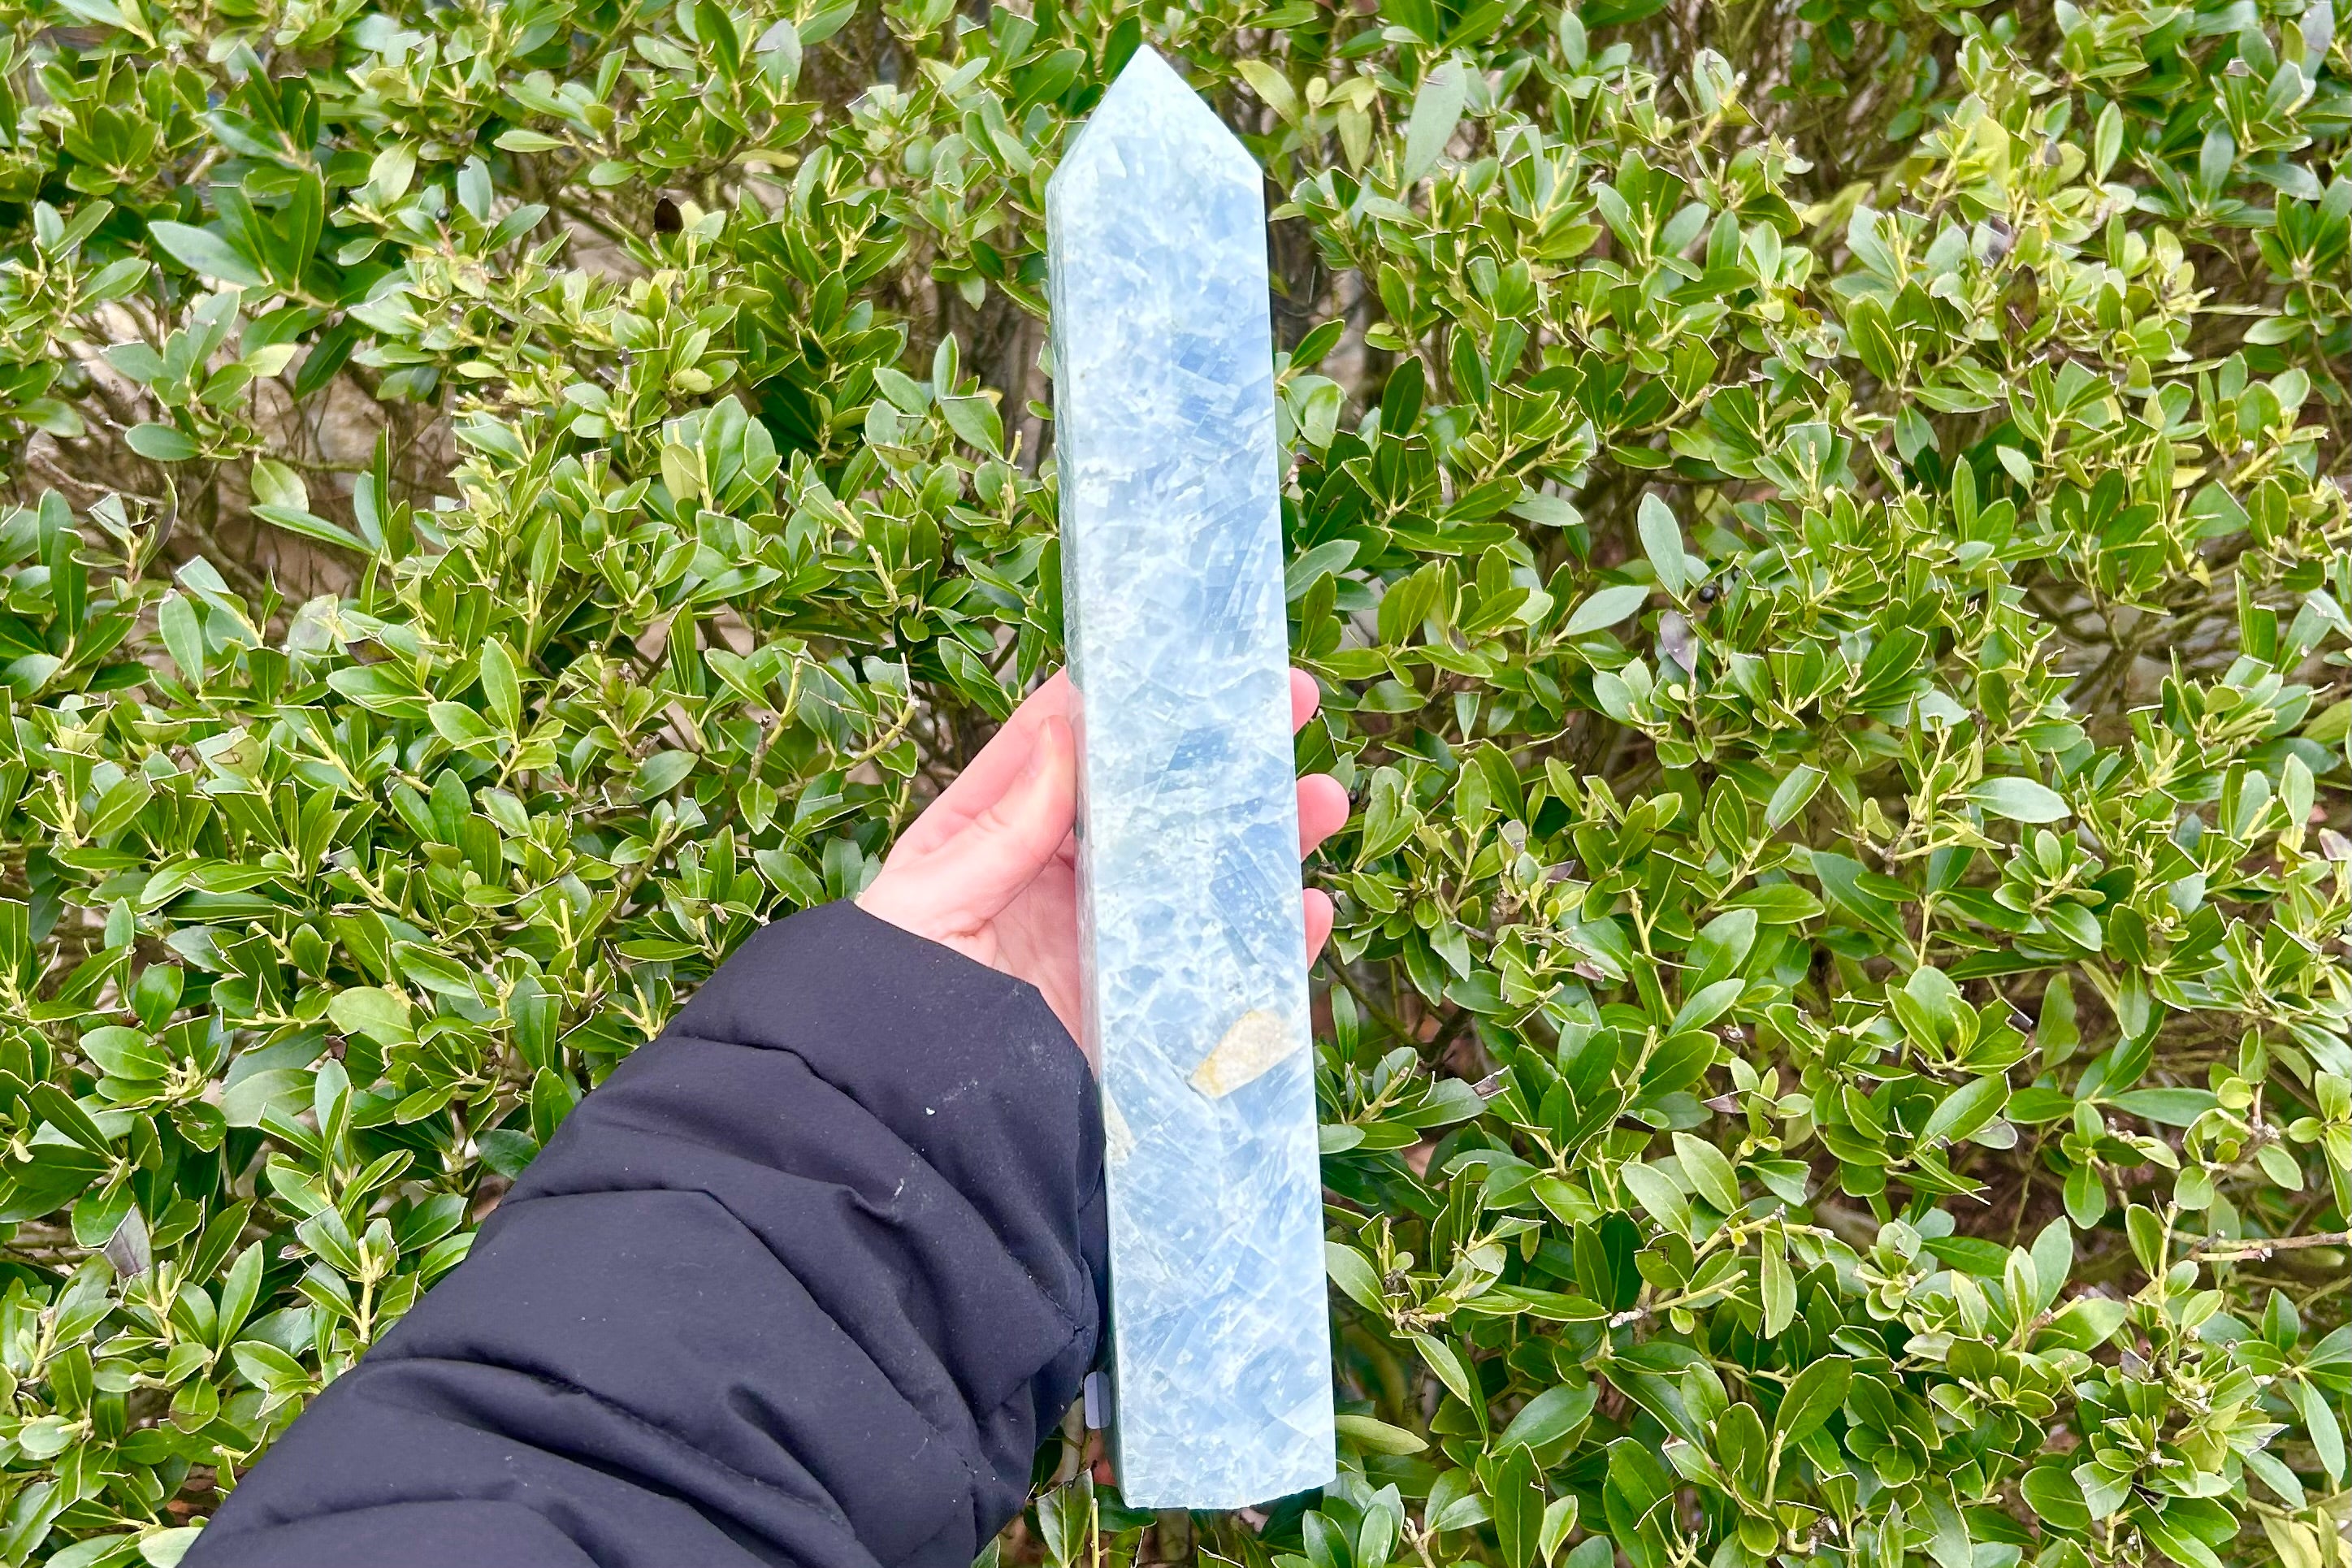 Blue Calcite Crystal Tower